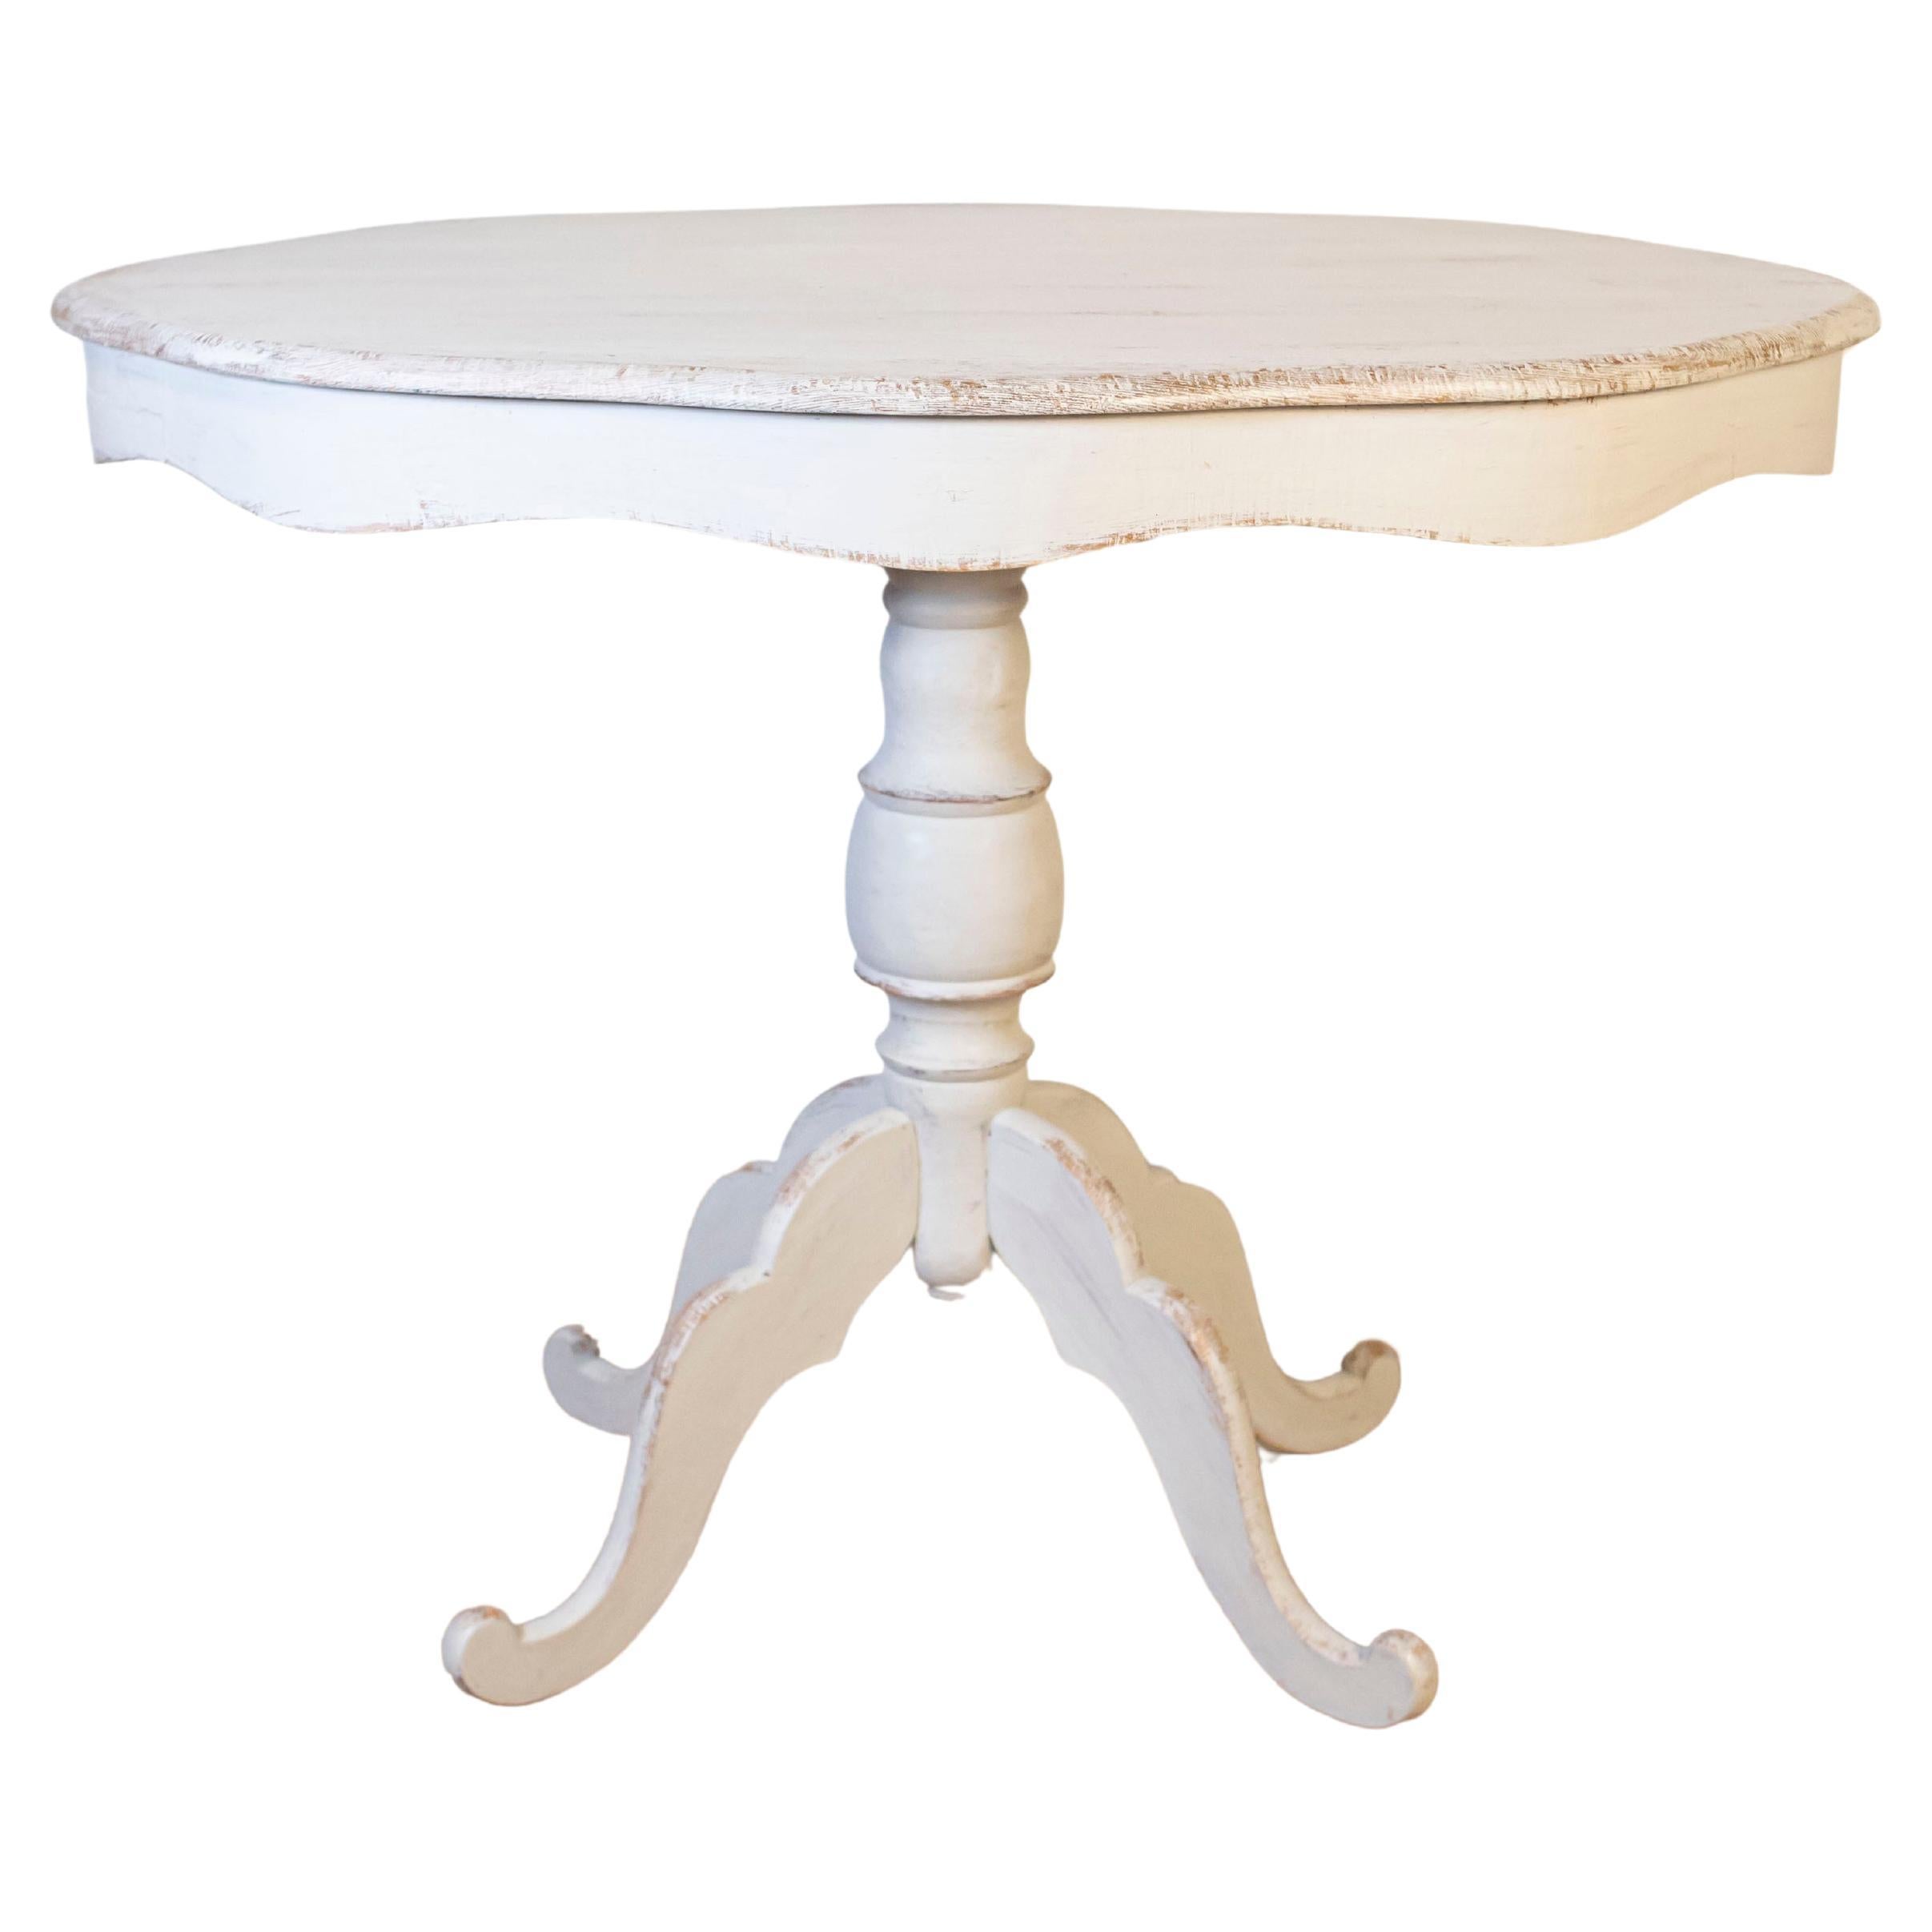 Swedish 1860s Painted Oval Pedestal Table with Carved Apron and Quadripod Base